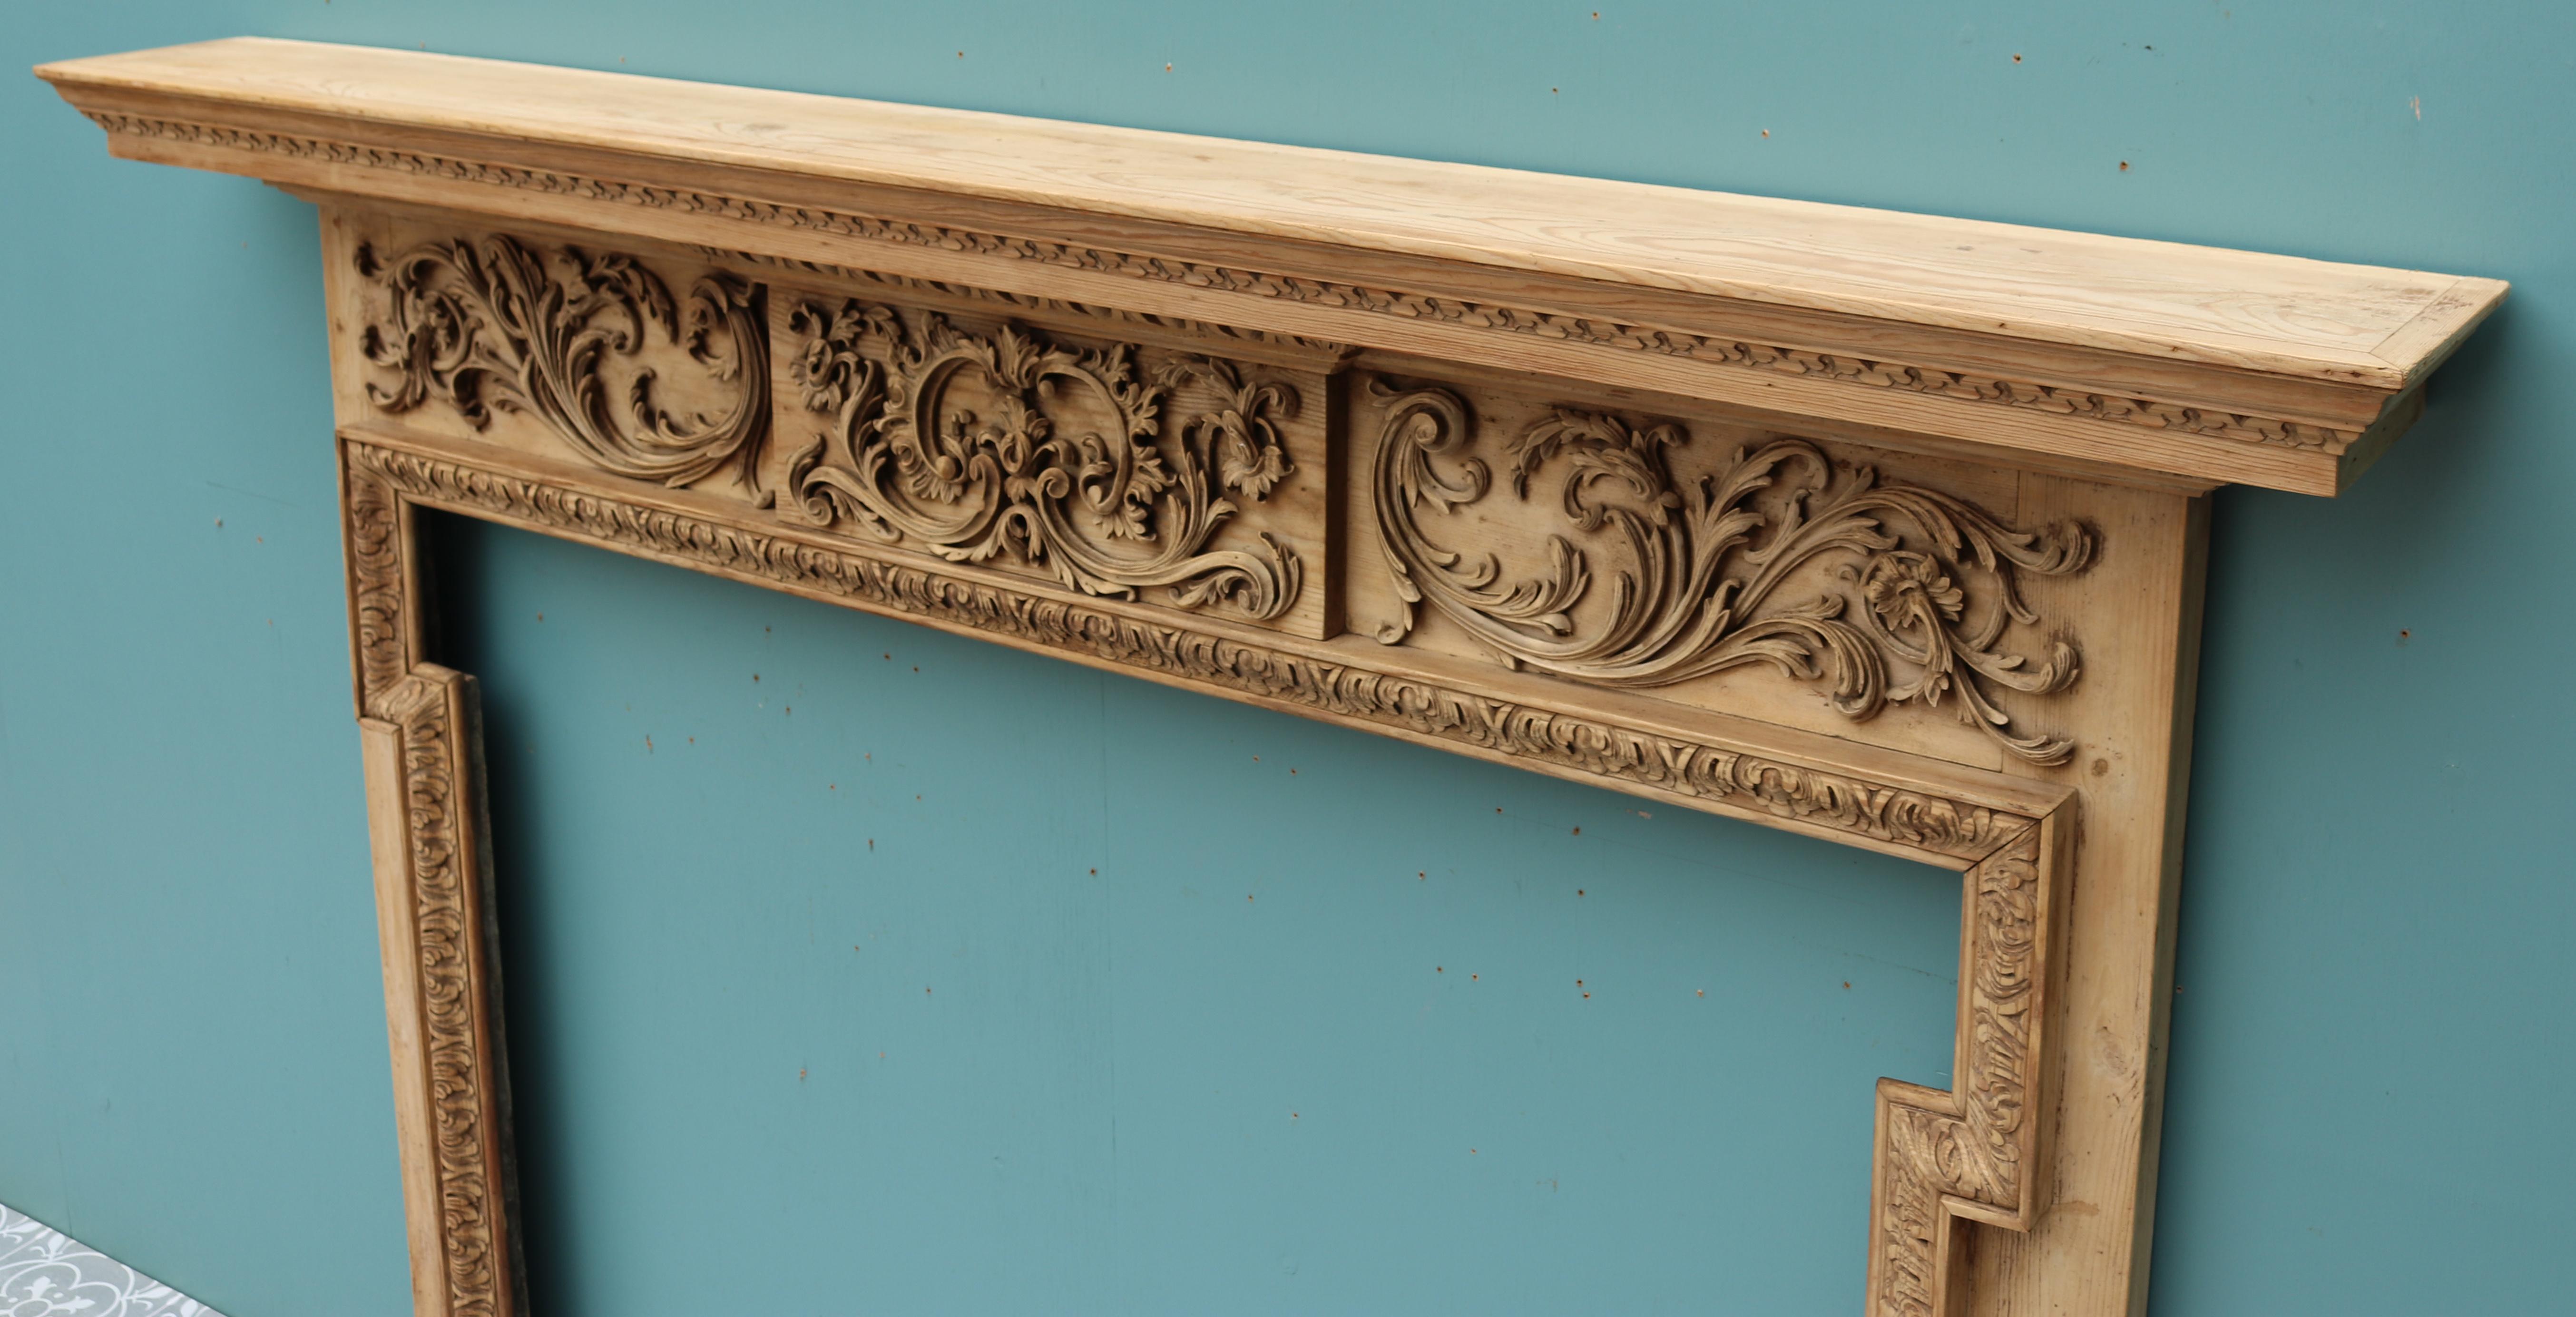 A late 19th century Georgian style fireplace carved with scrolling foliage

Additional dimensions:

Opening Height 82.5 cm

Opening Width 114 cm

Width between outside of foot blocks 138 cm